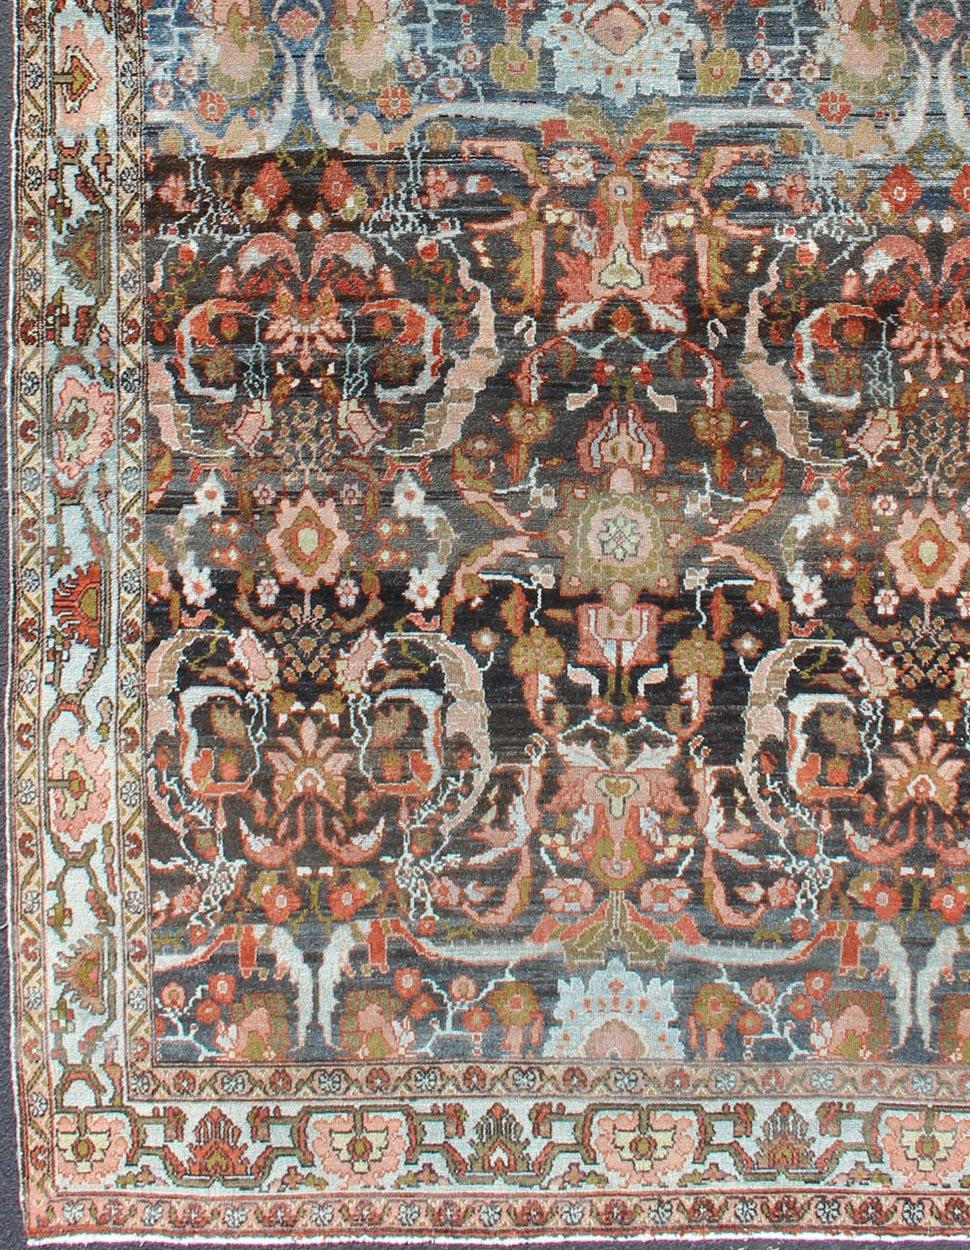 Fine weave Hamedan antique rug from Persia in various color tones with all-over expansive sub-geometric design, rug zir-17, country of origin / type: Iran / Hamedan, circa 1920.

This magnificent antique fine weave Hamedan features beautiful